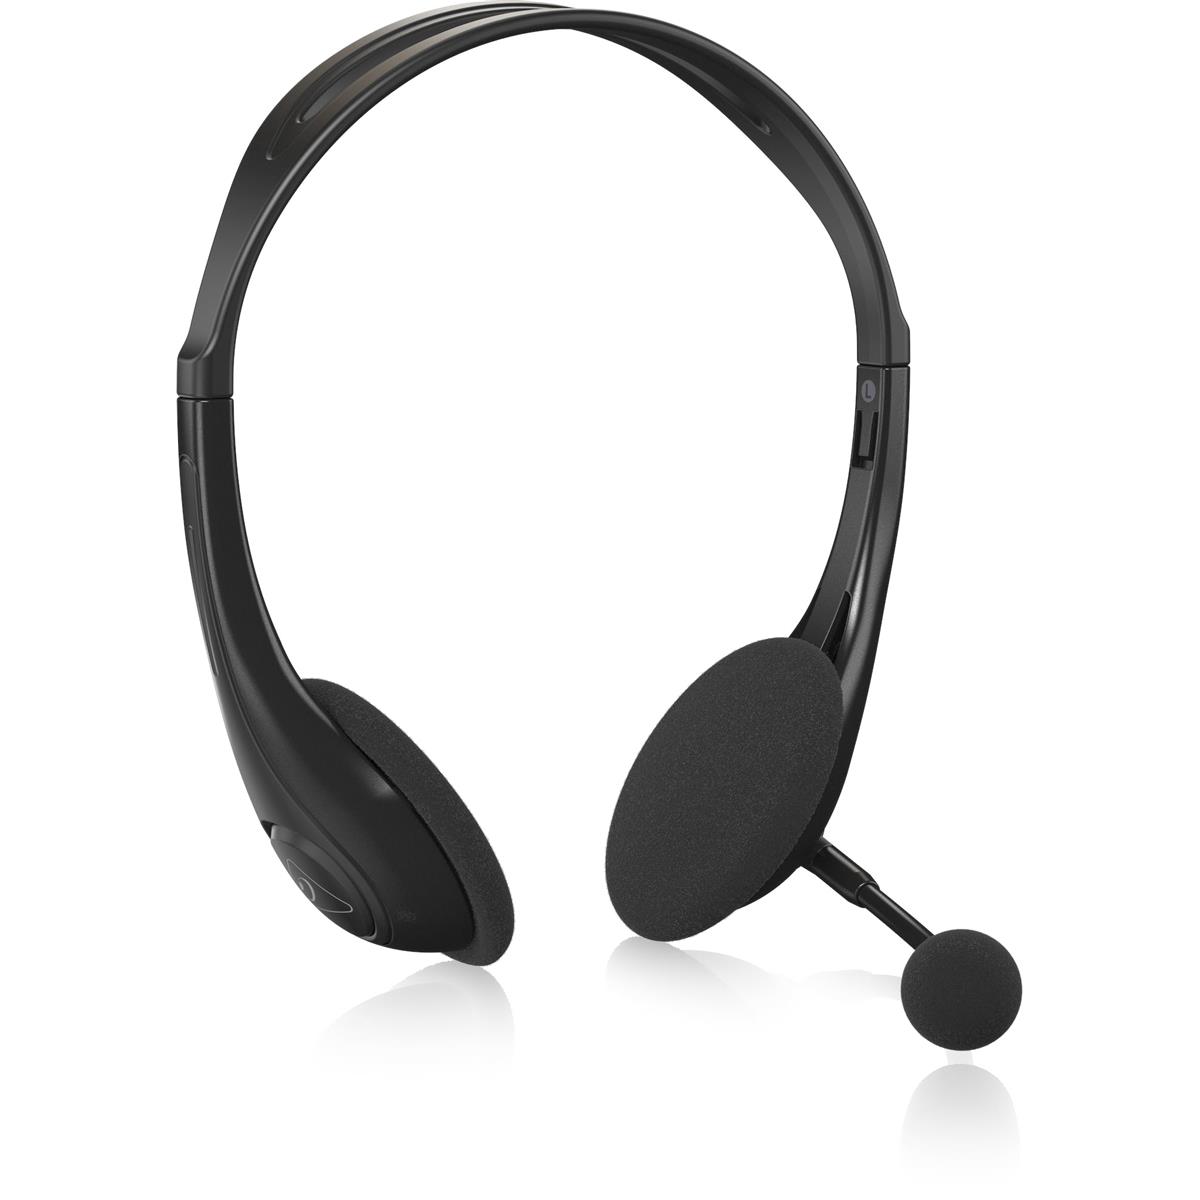 Image of Behringer HS20 Professional Wired USB Stereo Headset